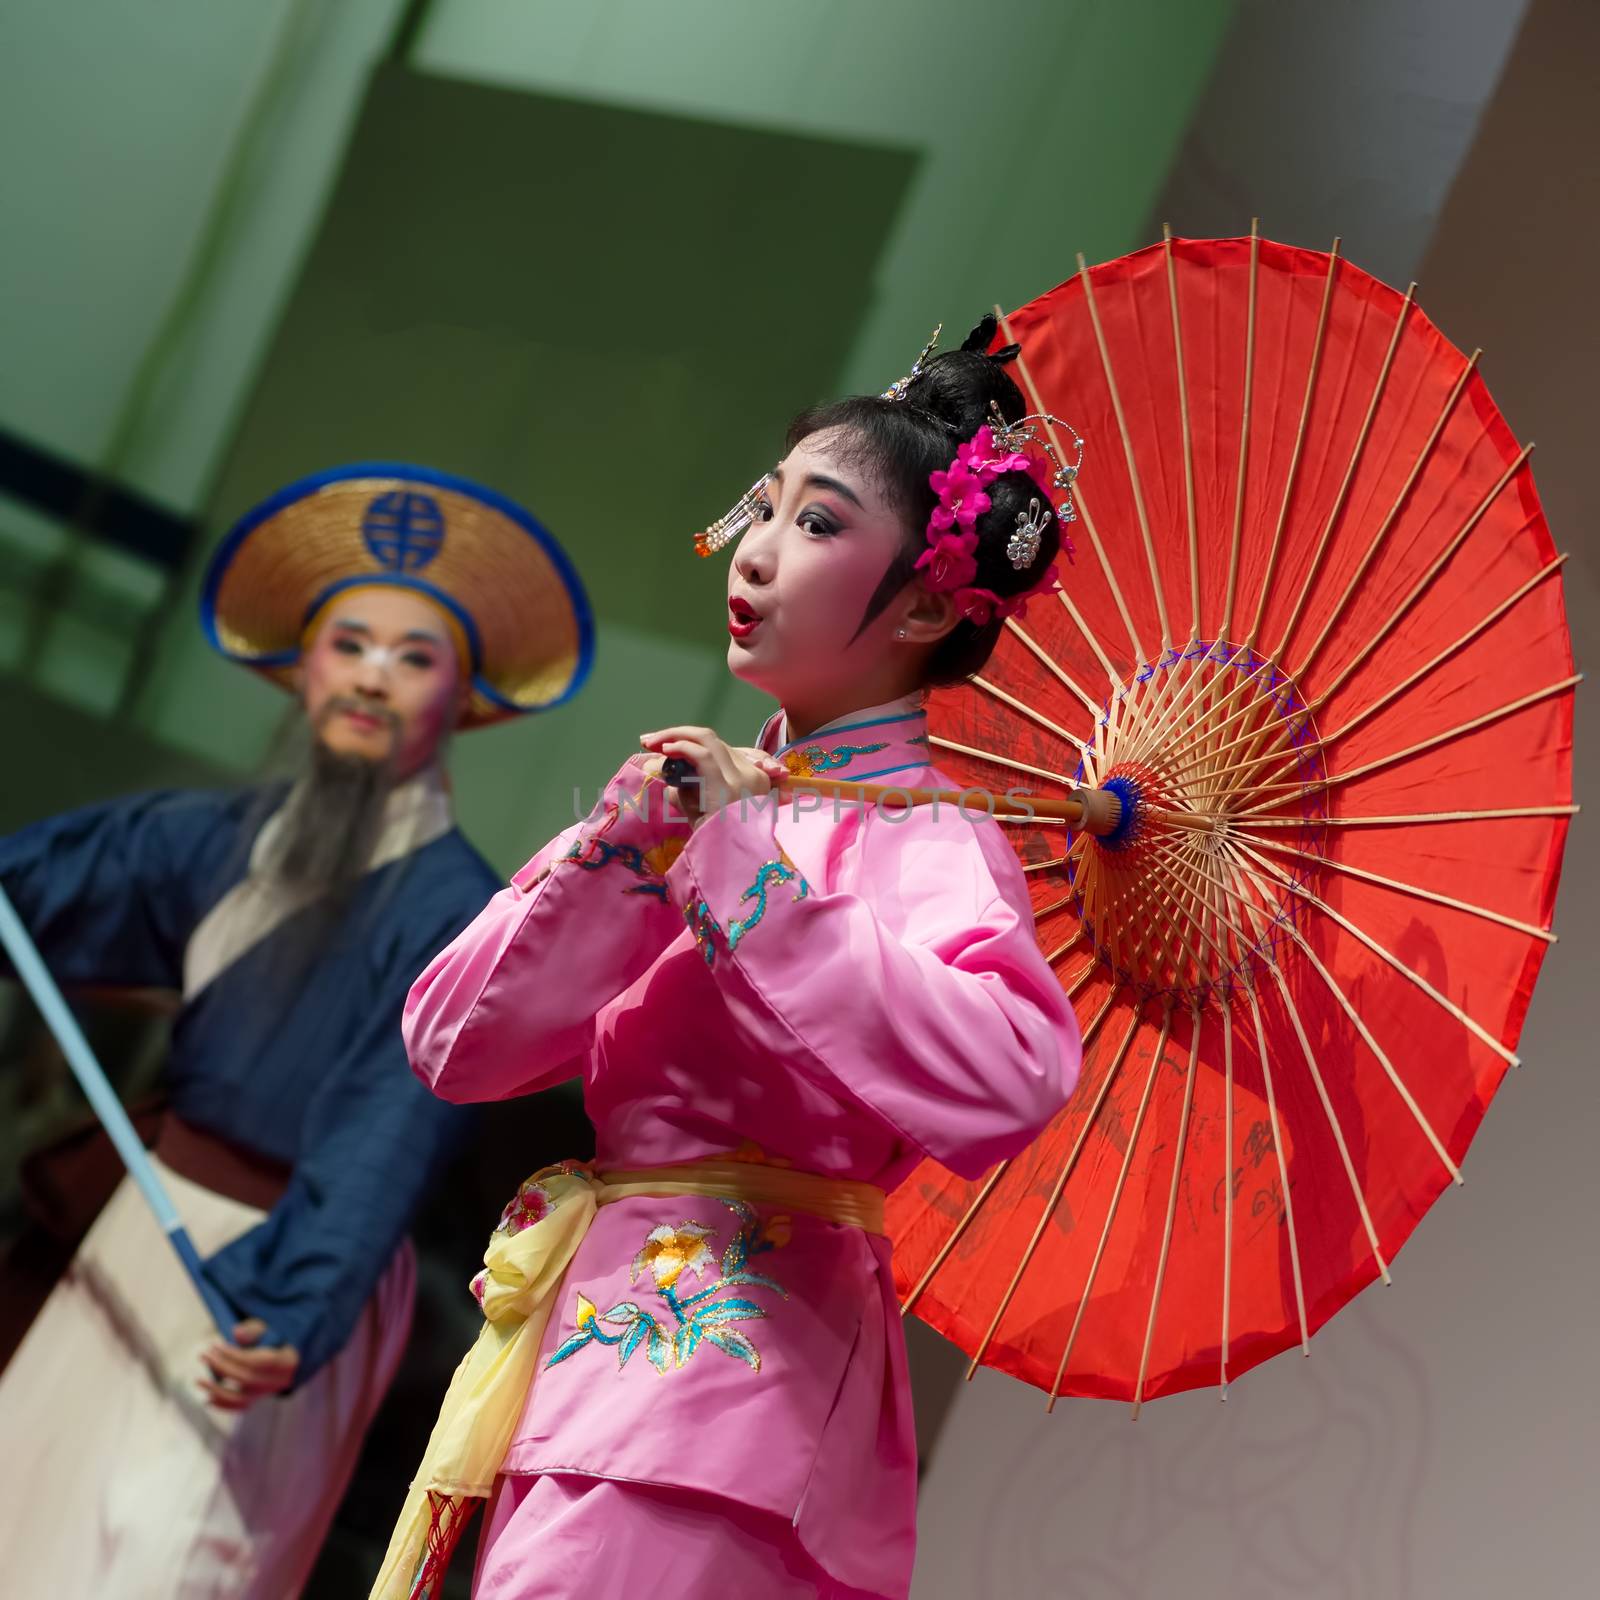 Chinese Opera, Singapore, December 10, 2016.
Chinese opera is a popular form of drama and musical theater in China.
They incorporated various art forms, such as music, song and dance, martial arts, acrobatics, as well as literary art forms to become Chinese opera.